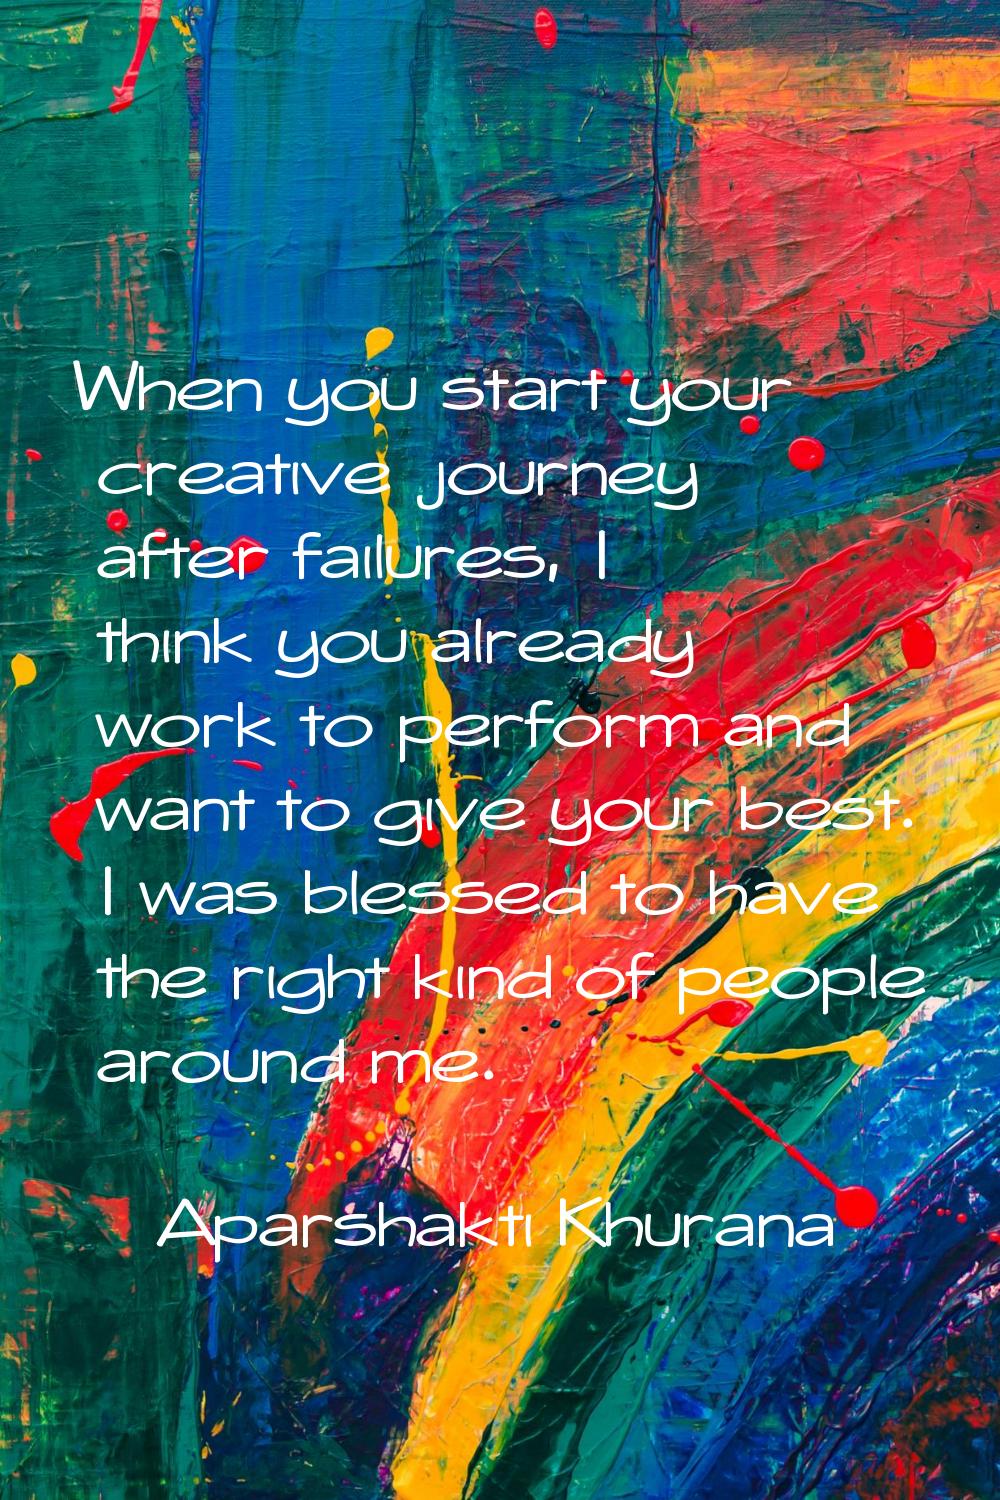 When you start your creative journey after failures, I think you already work to perform and want t